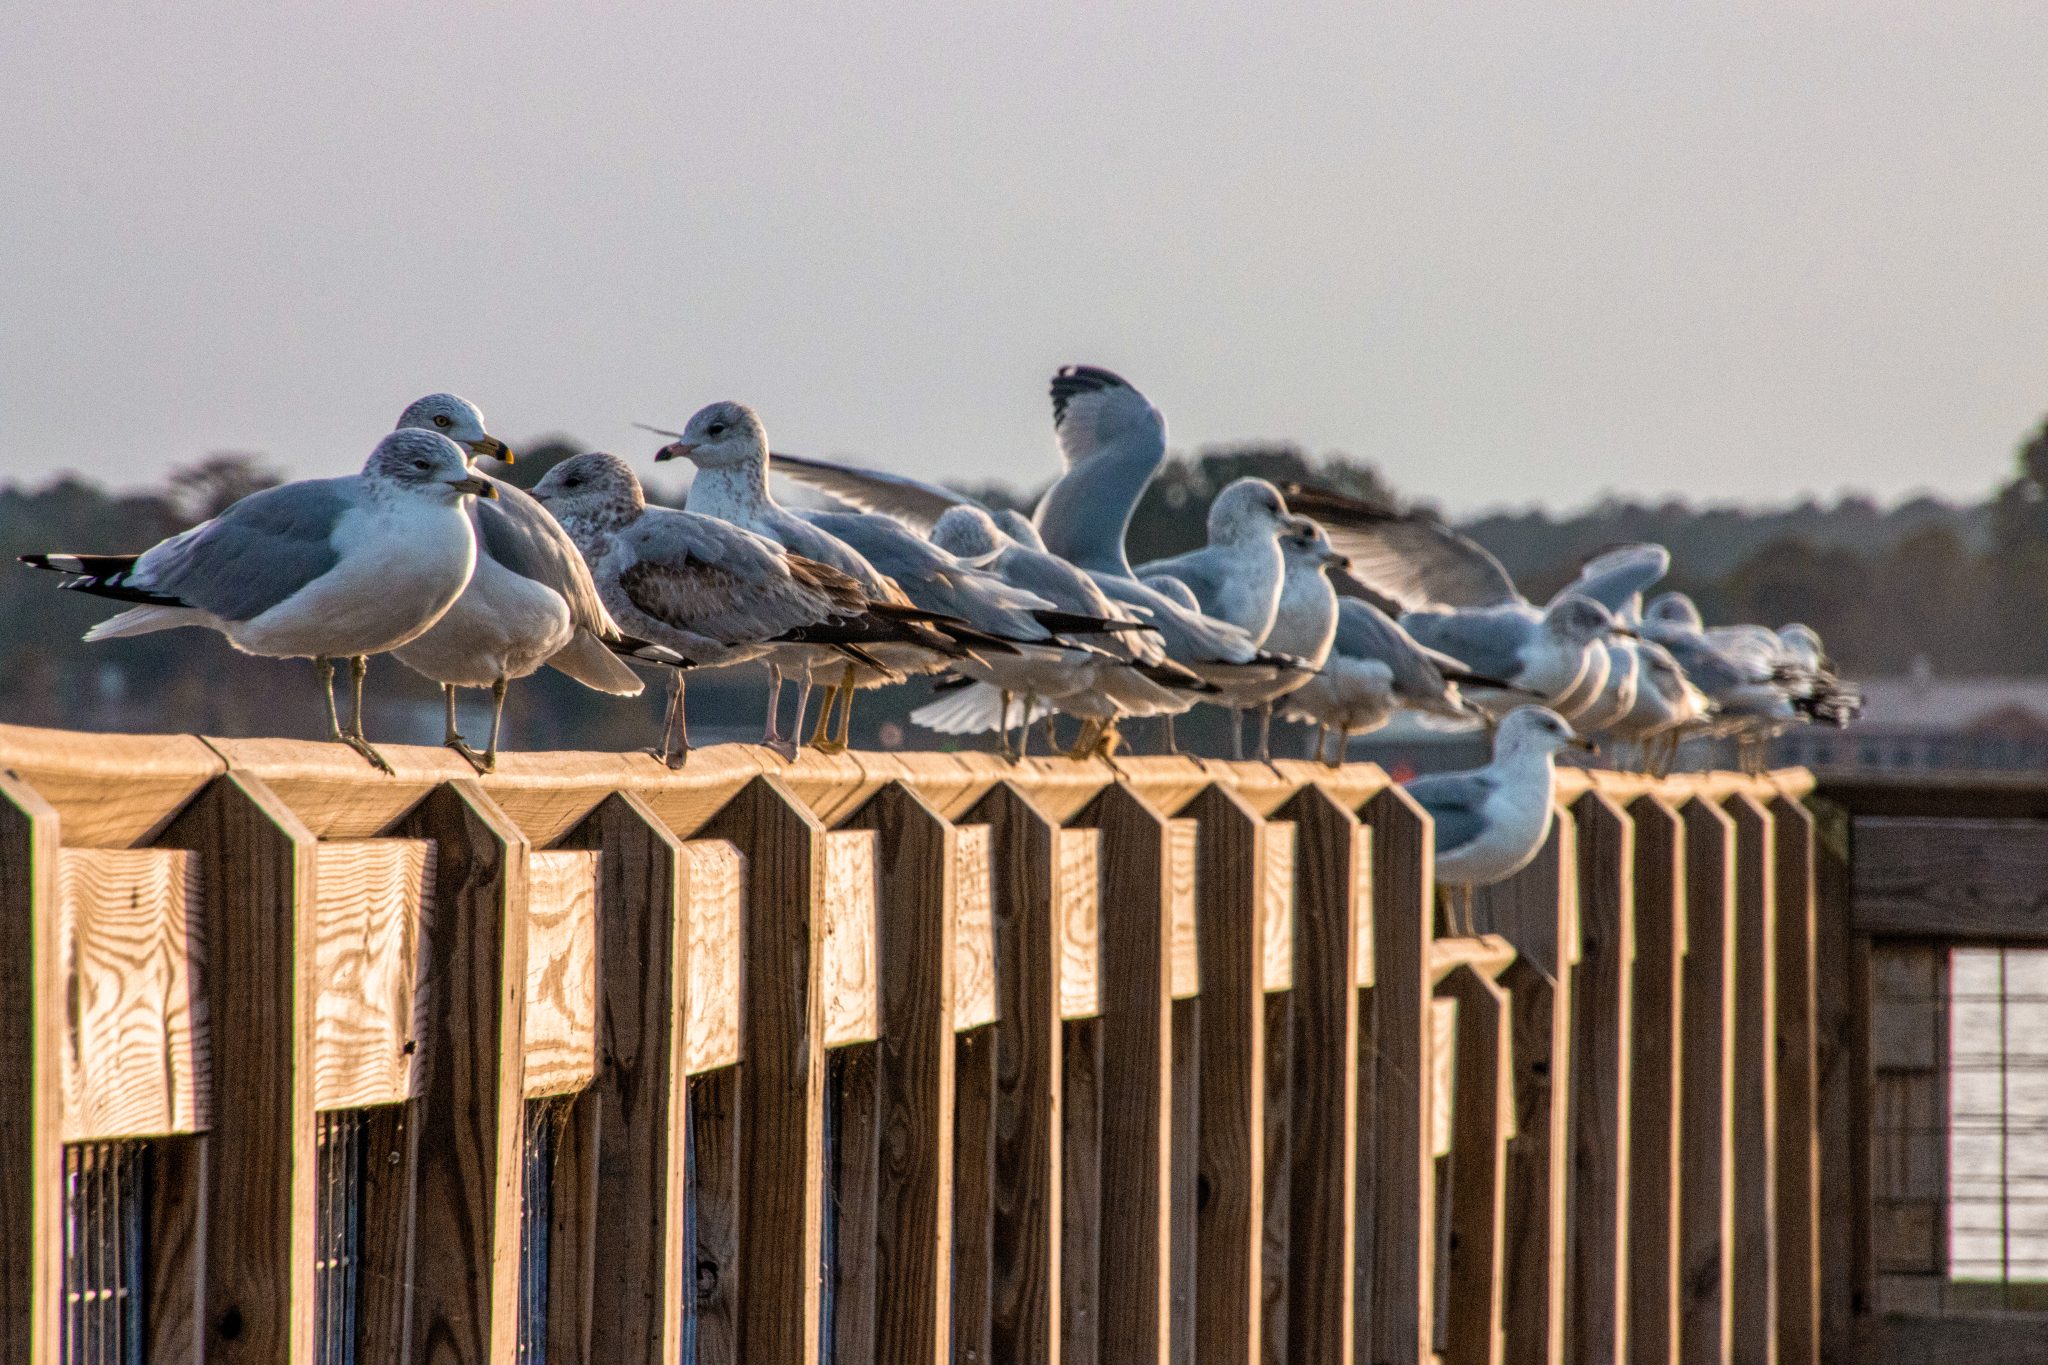 Row of seagulls standing on a pier railing at sunset